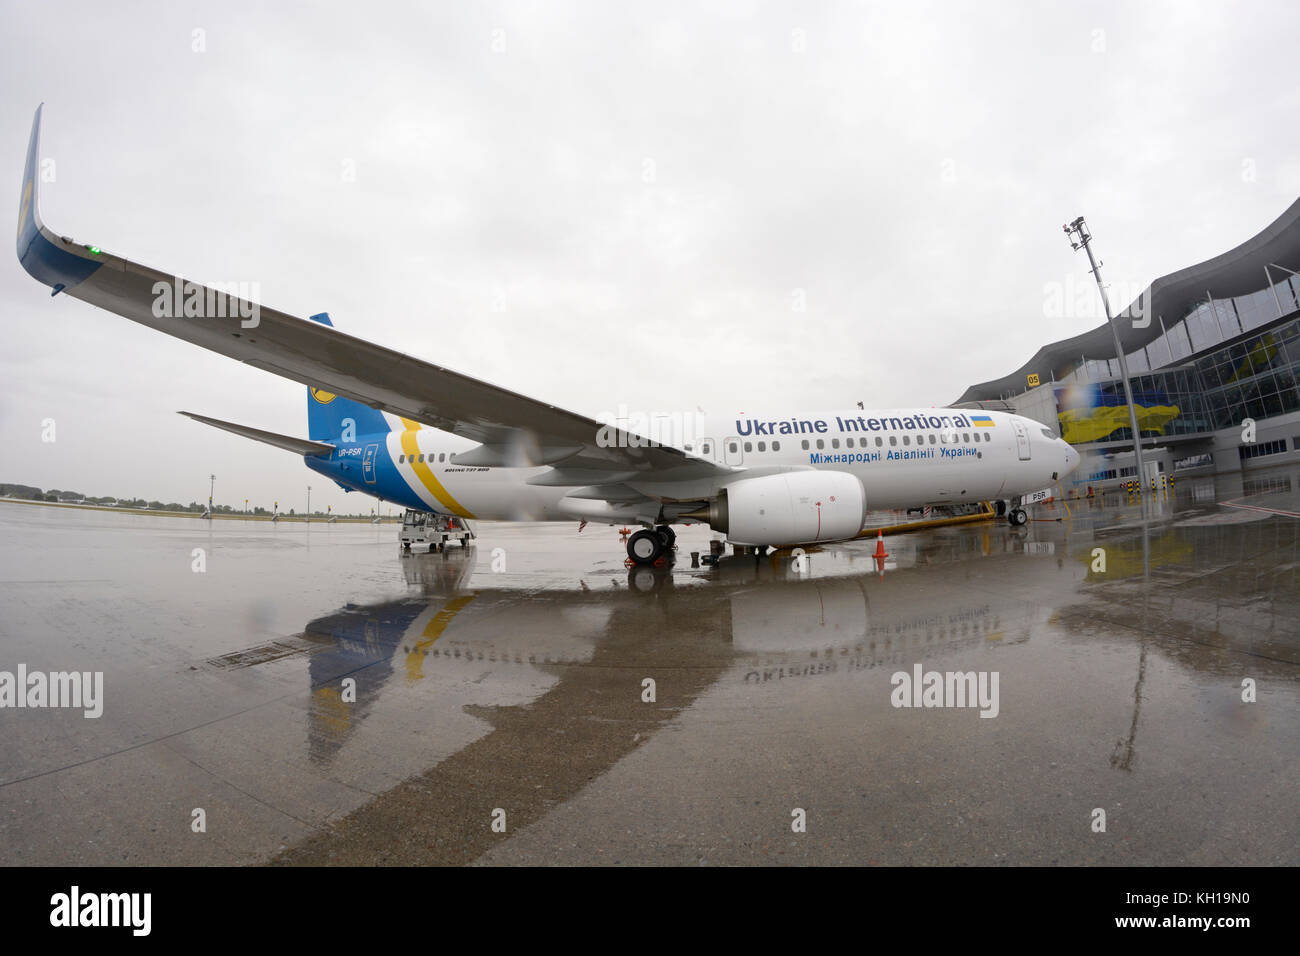 Aircraft Boeing 737-400 standing on aircraft parking space, ready for technical inspection. Stock Photo